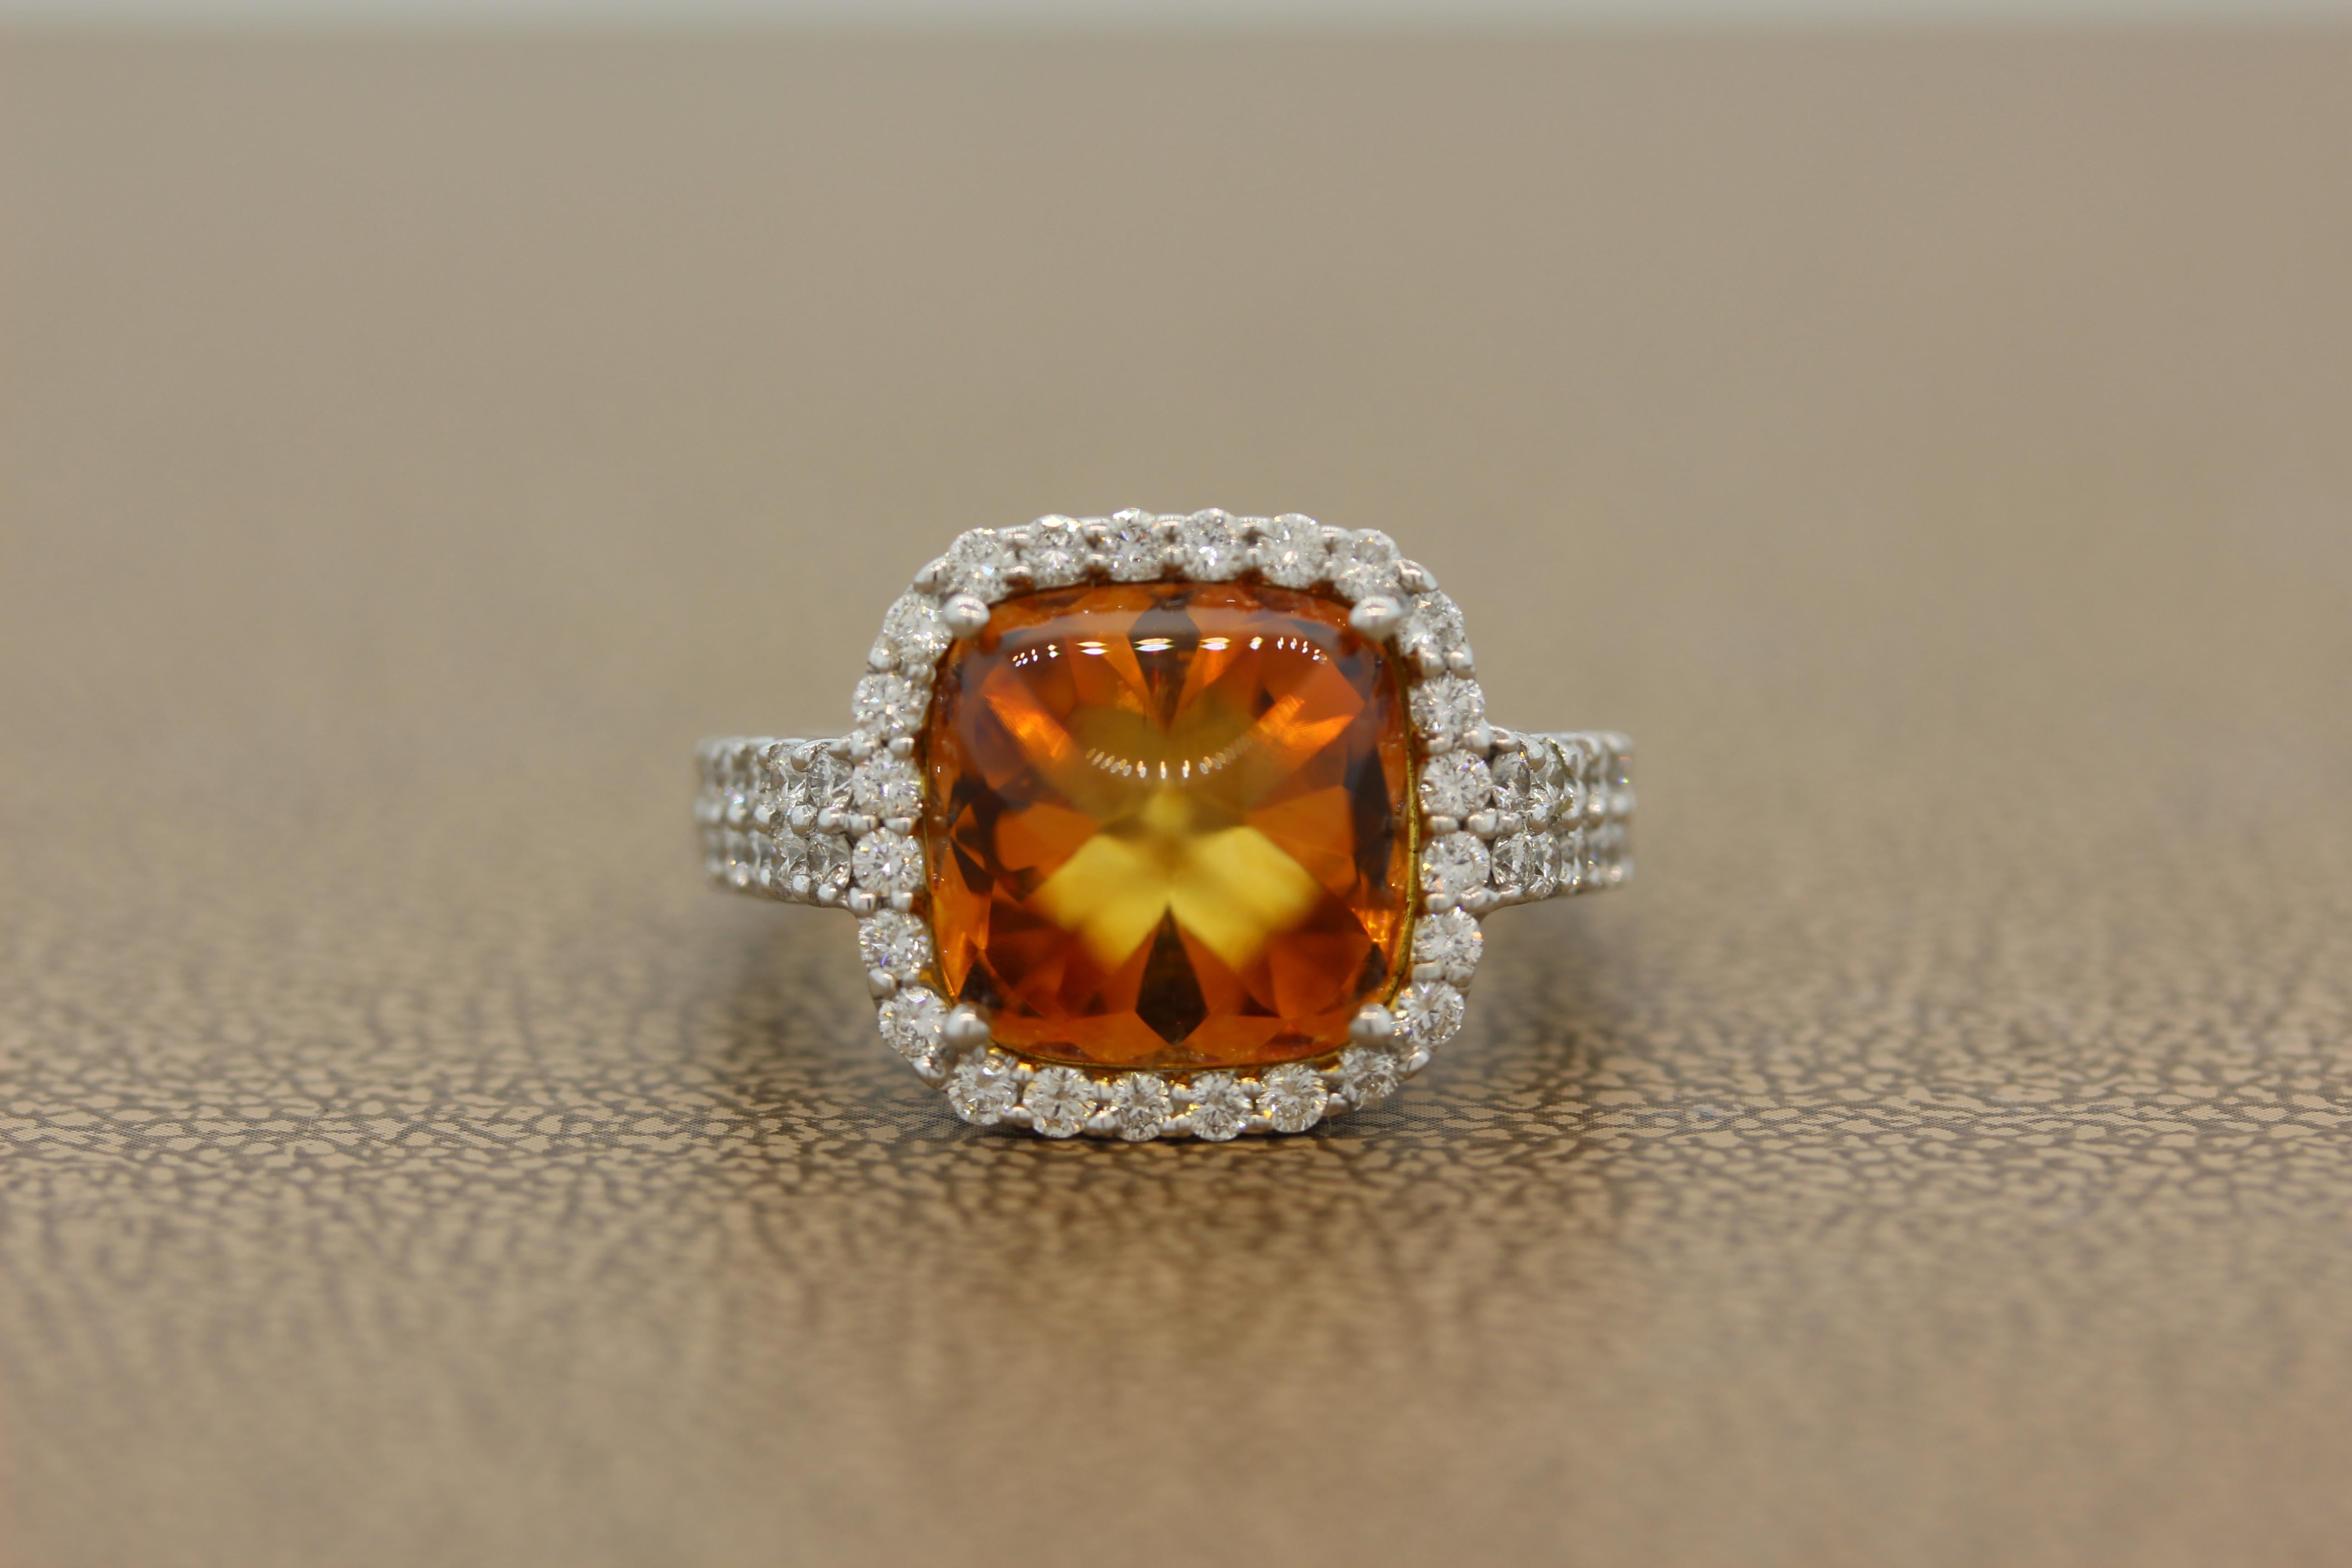 A delightful ring featuring a rich tone citrine weighting 6.93 carats. The sugarloaf citrine is haloed by 0.97 carats of round cut sparkling colorless diamonds set in 14K white gold.

Ring Size 7.25 (Sizable)

